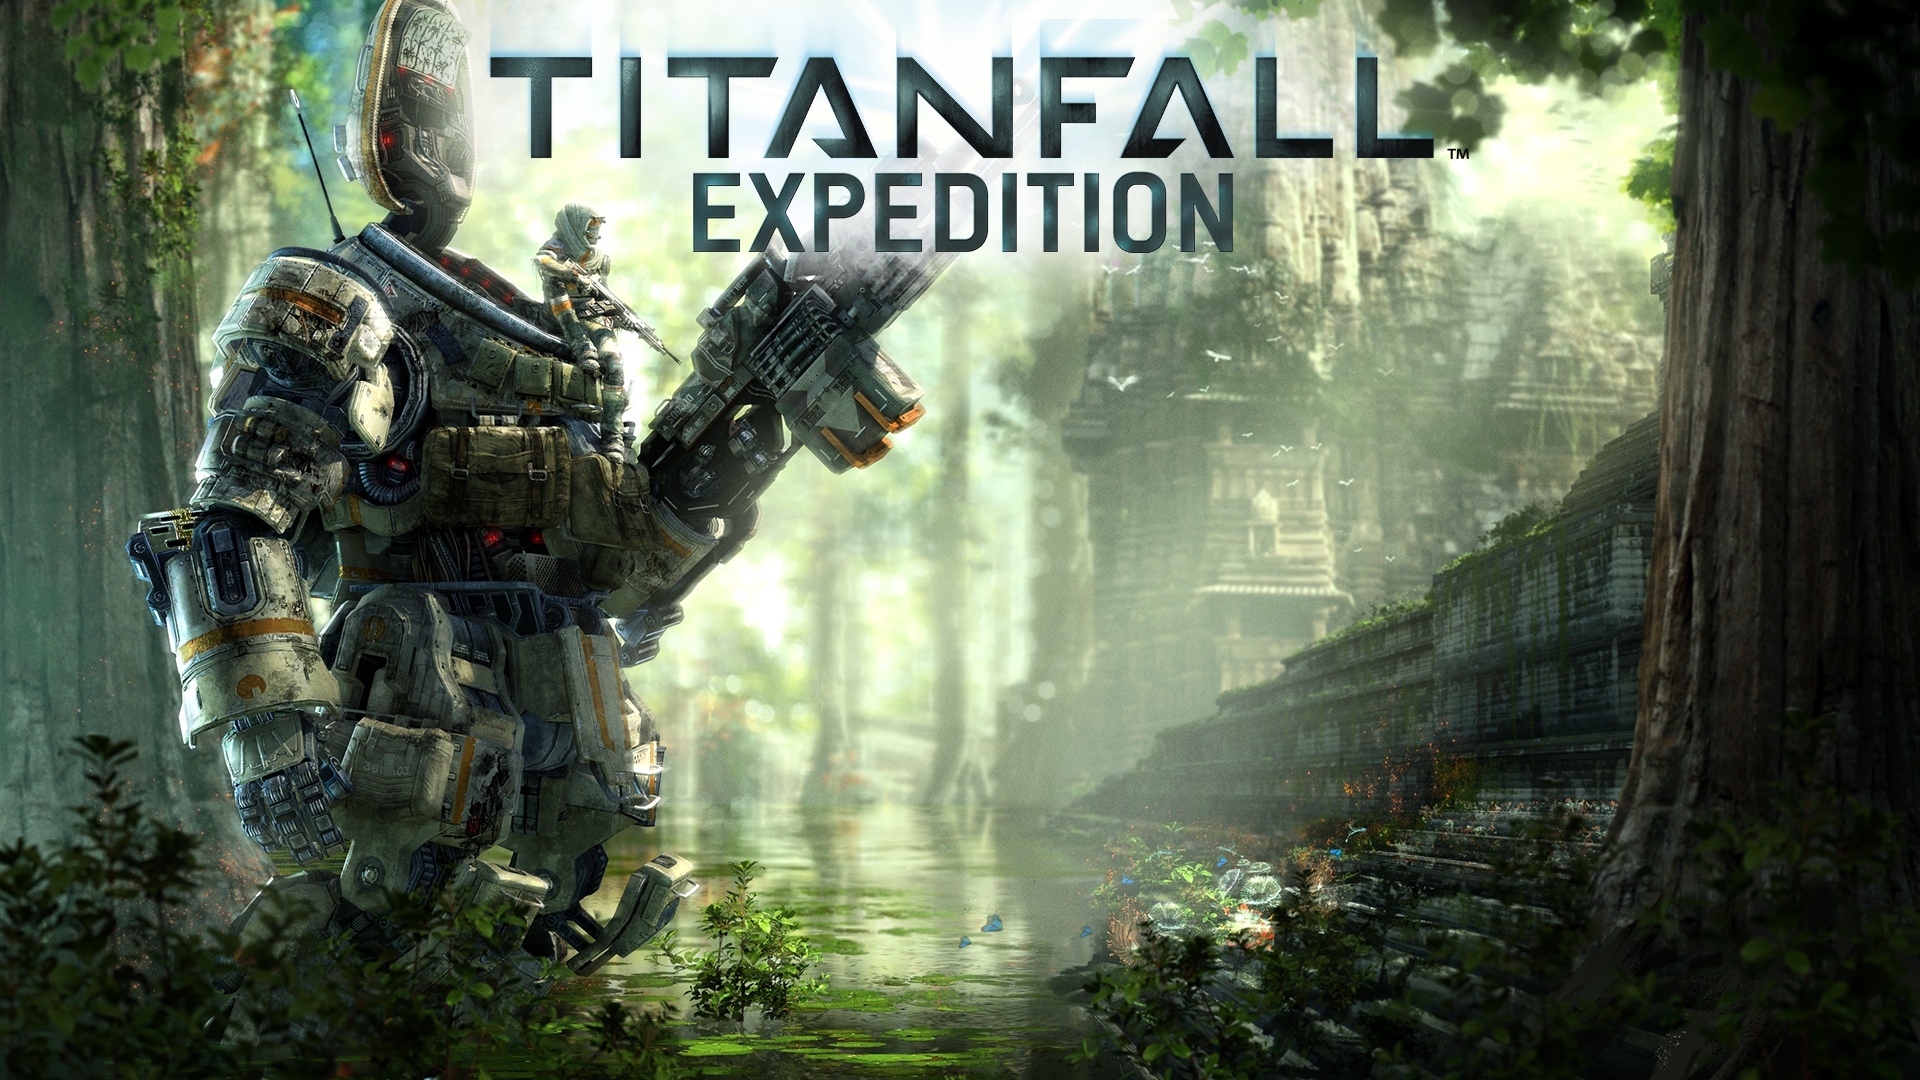 Media asset in full size related to 3dfxzone.it news item entitled as follows: Respawn annuncia Expedition, il primo DLC dello shooter Titanfall | Image Name: news21043_Titanfall-DLC-Expedition_1.jpg